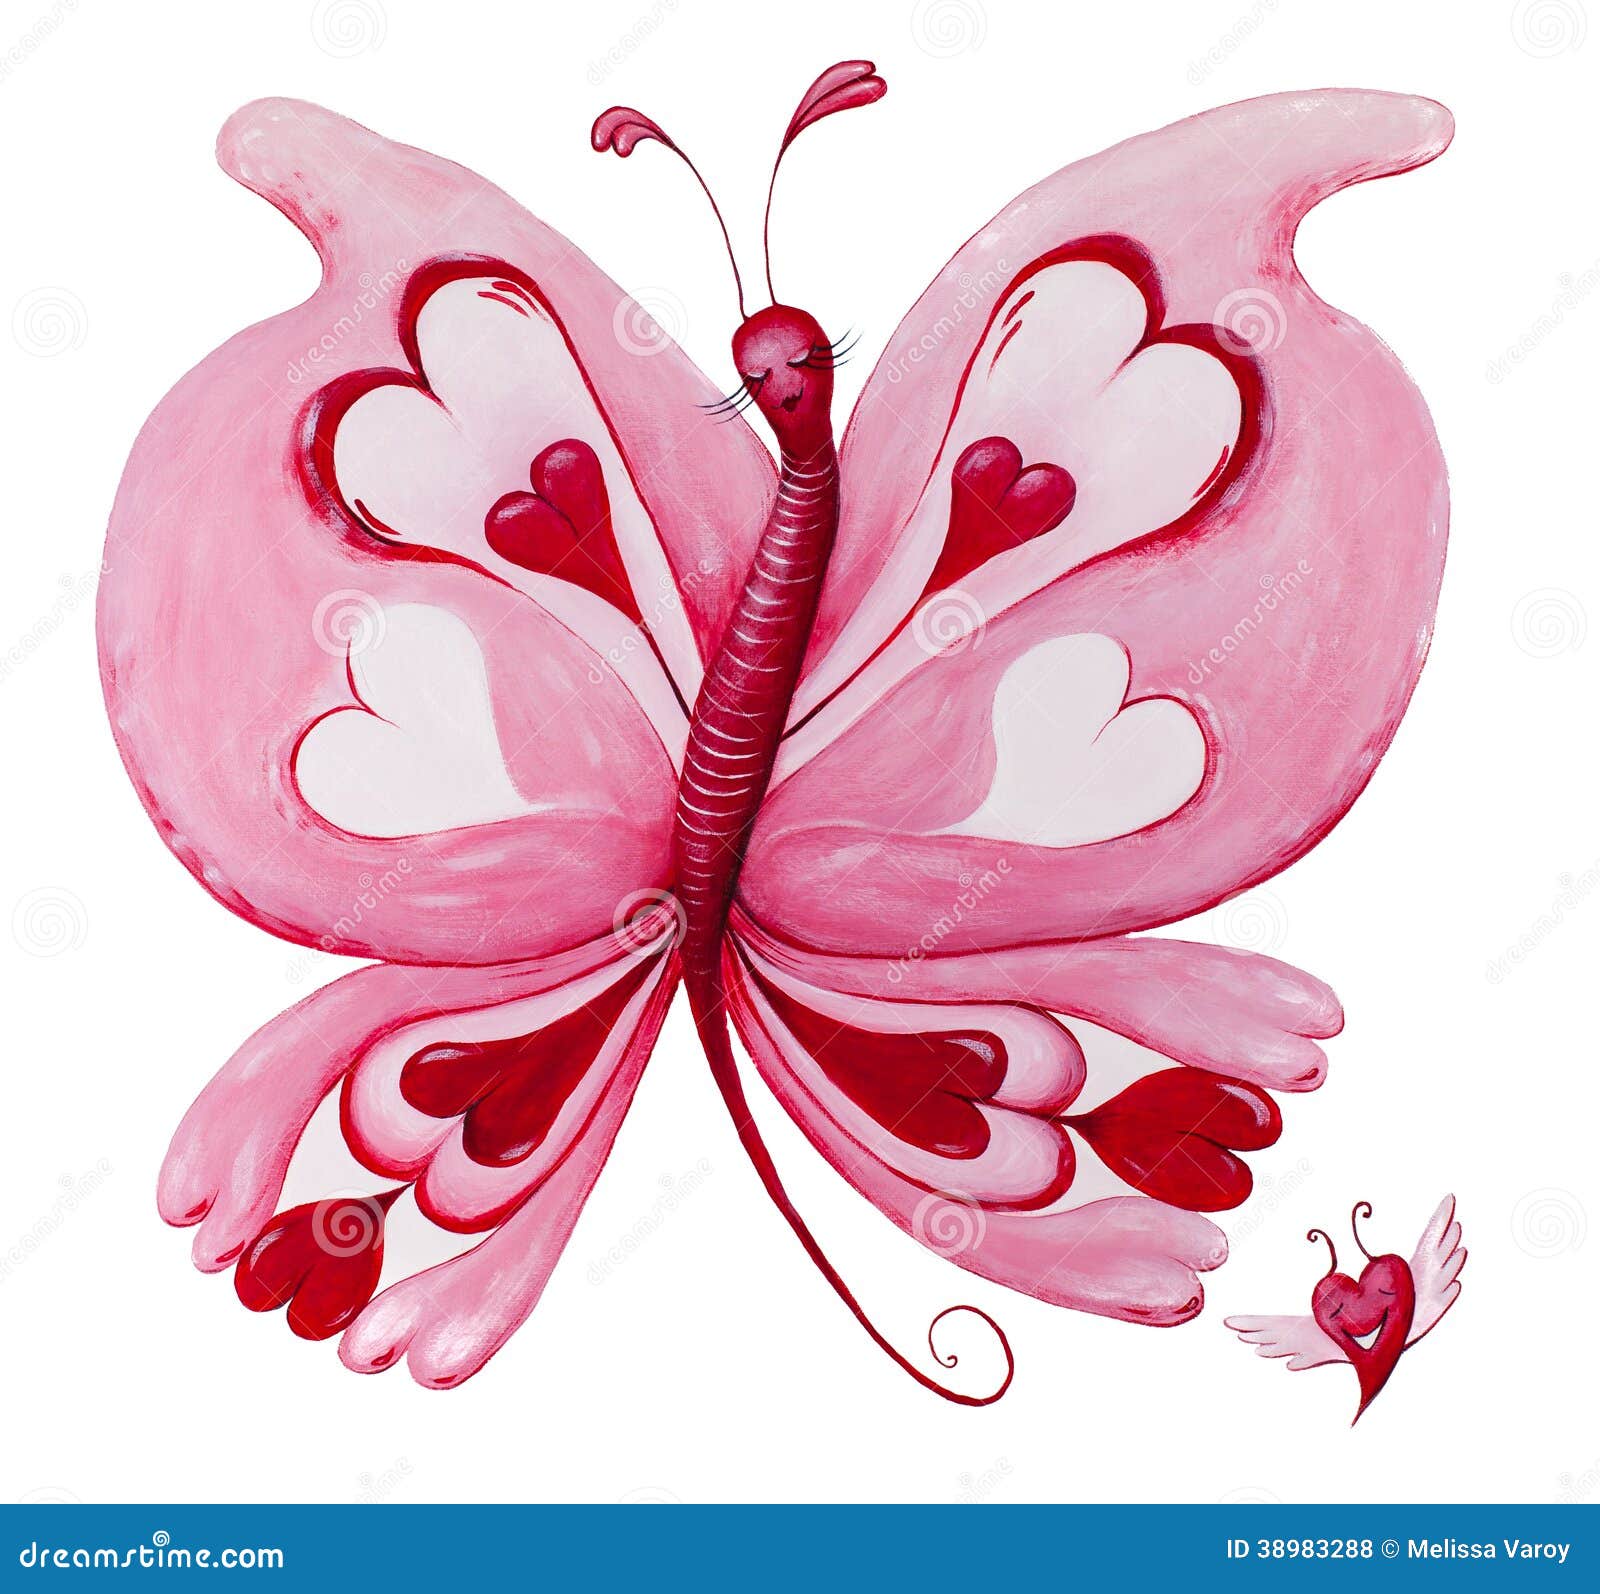 beautiful red loveheart butterfly painting on white